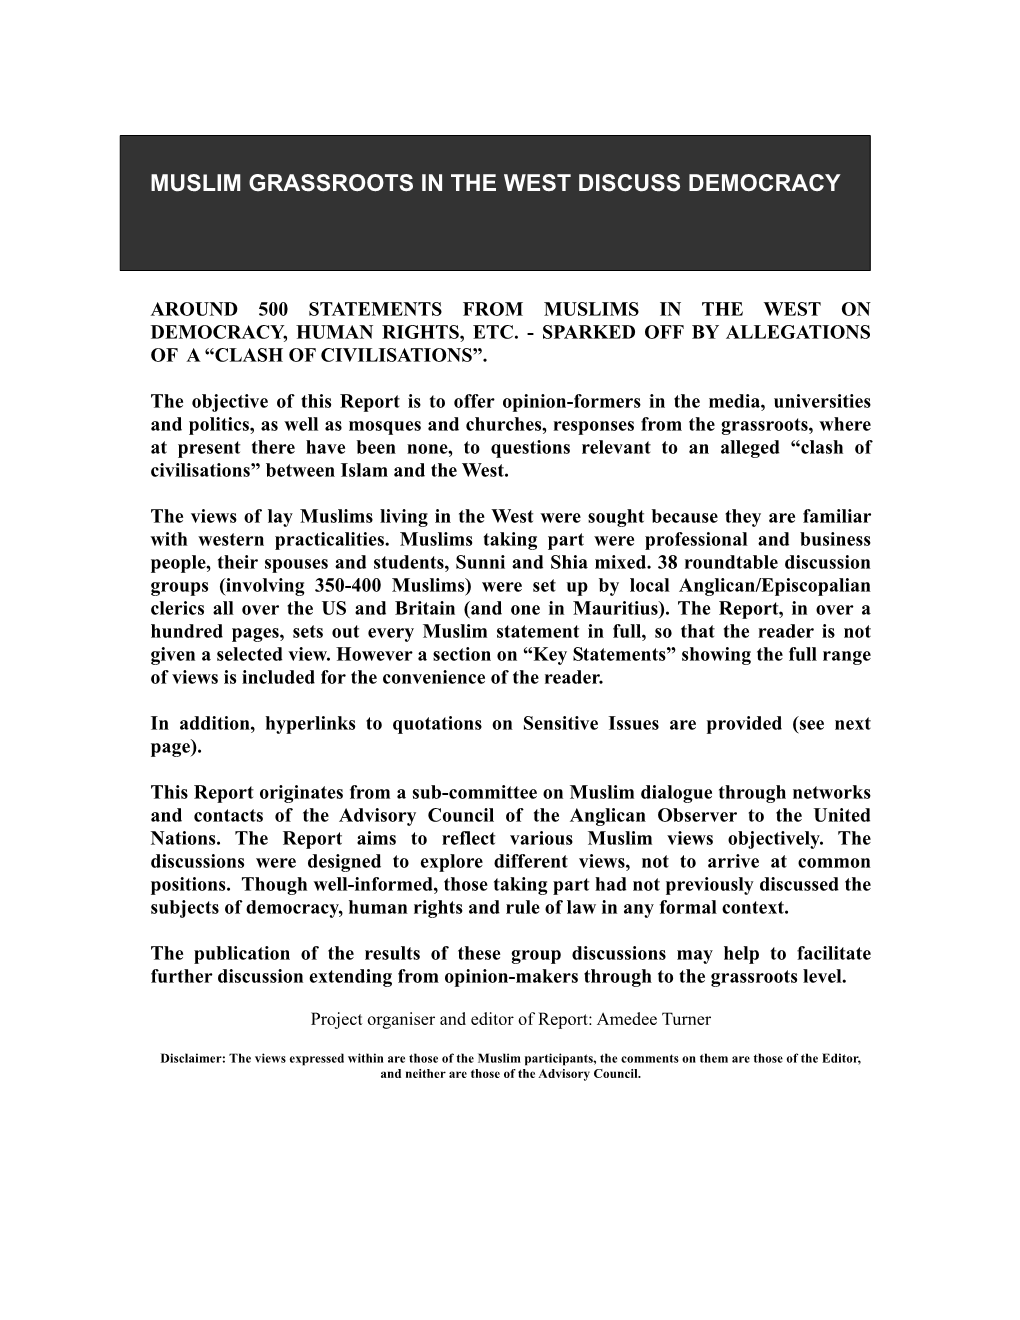 Muslim Grassroots in the West Discuss Democracy